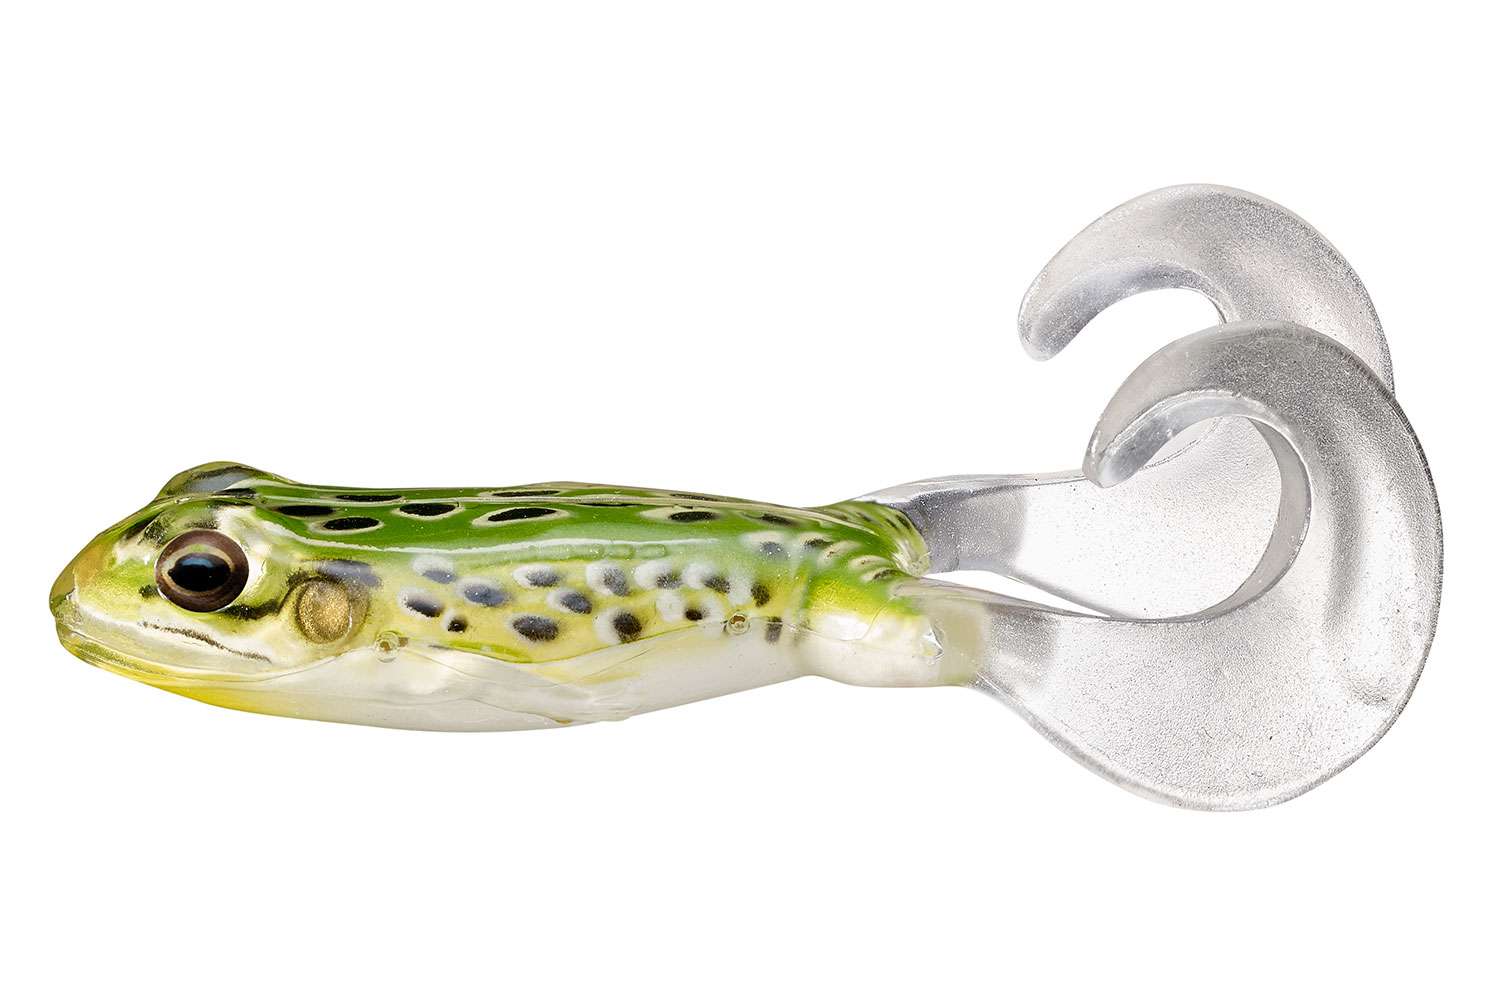  <B>Livetarget Freestyle Frog</B>
<BR>The Freestyle Frog is a versatile twin-tail bait that can be fished on the surface over vegetation or dive sub-surface in open runs. It hosts the realistic Inner-Core anatomy of a fleeing frog, while the clear Exo-Skin generates a tantalizing surface buzzing action. Injected Core Technology (ICT) enables the Inner-Core to host a life-like frog profile, while the Exo-Skin gives the lure its signature action. The new lure comes in three sizes to meet a variety of fishing applications: 4-, 3 1/2- and 3-inch, as well as eight realistic forage-matching colors. The Livetarget Freestyle Frog comes in packs of two. 
<BR>
<B>MSRP: $9.99</B>

<br>
<a href=